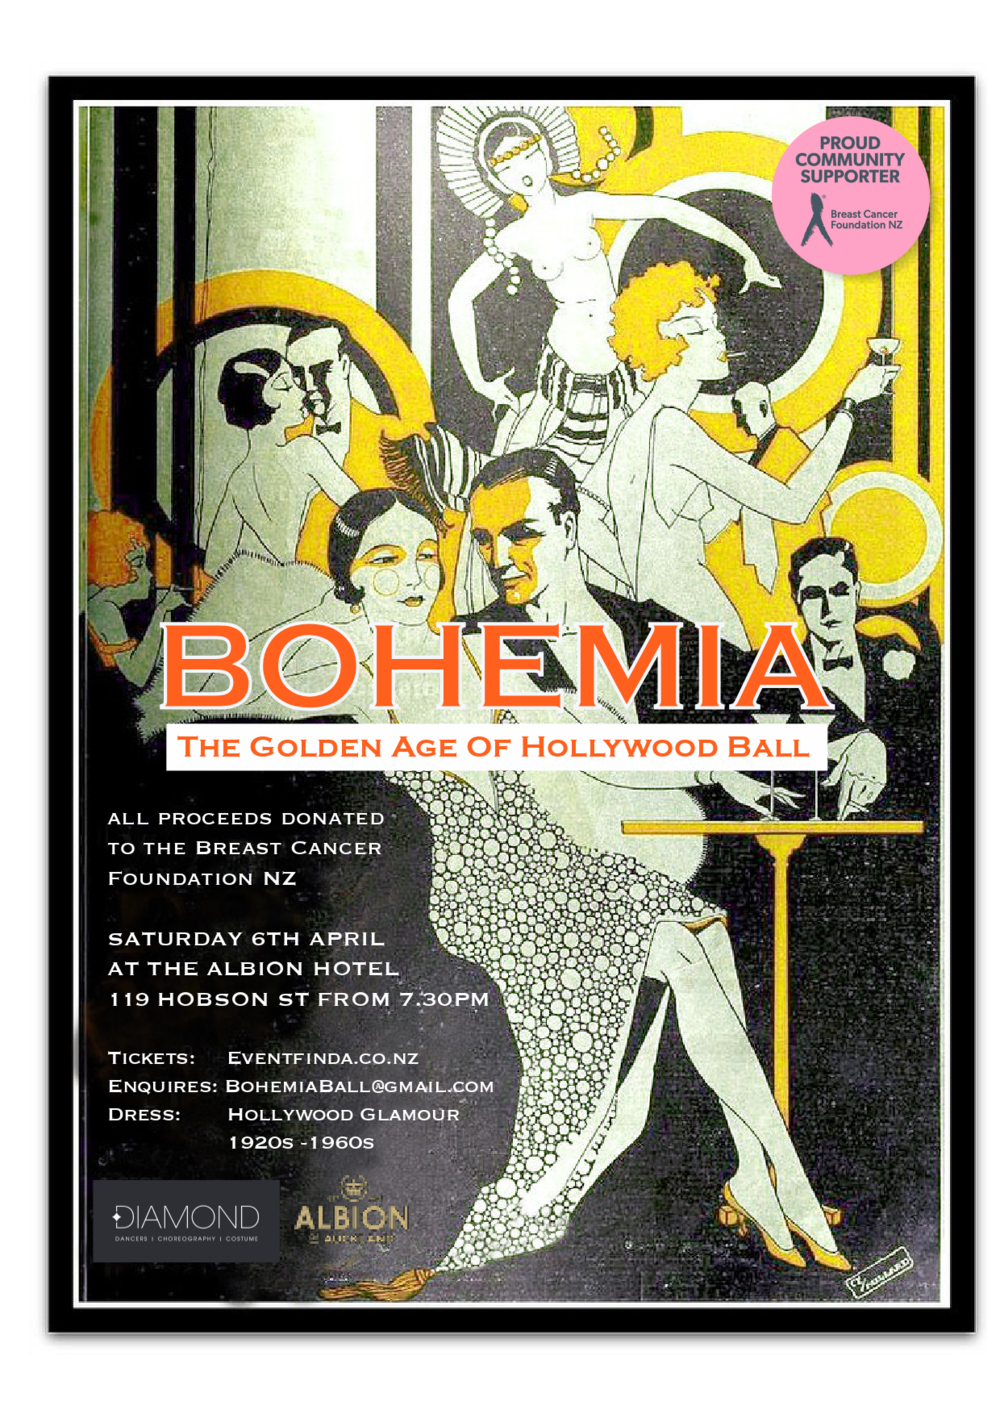 Bohemia – The Golden Age of Hollywood Ball